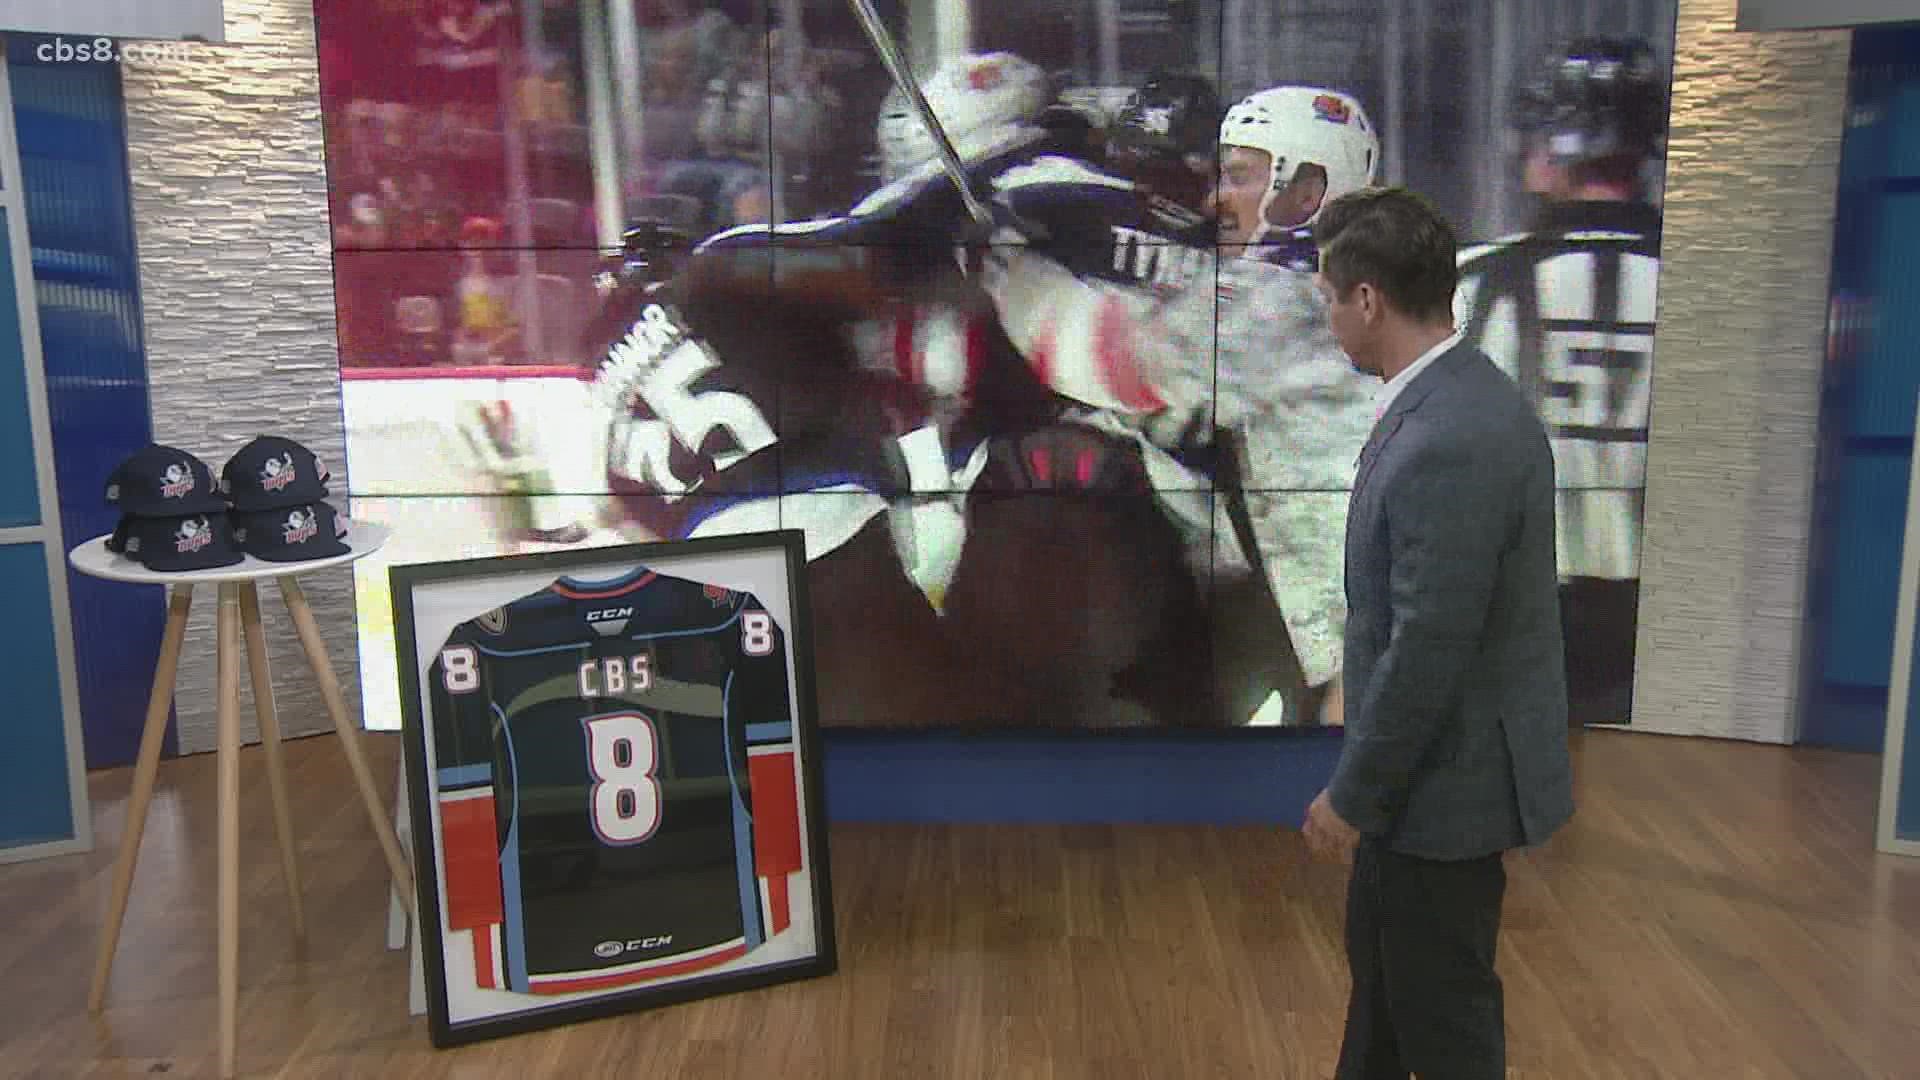 Gulls President of Business Operations, Matt Savant talked about the game and gave News 8 an awesome Gulls jersey.